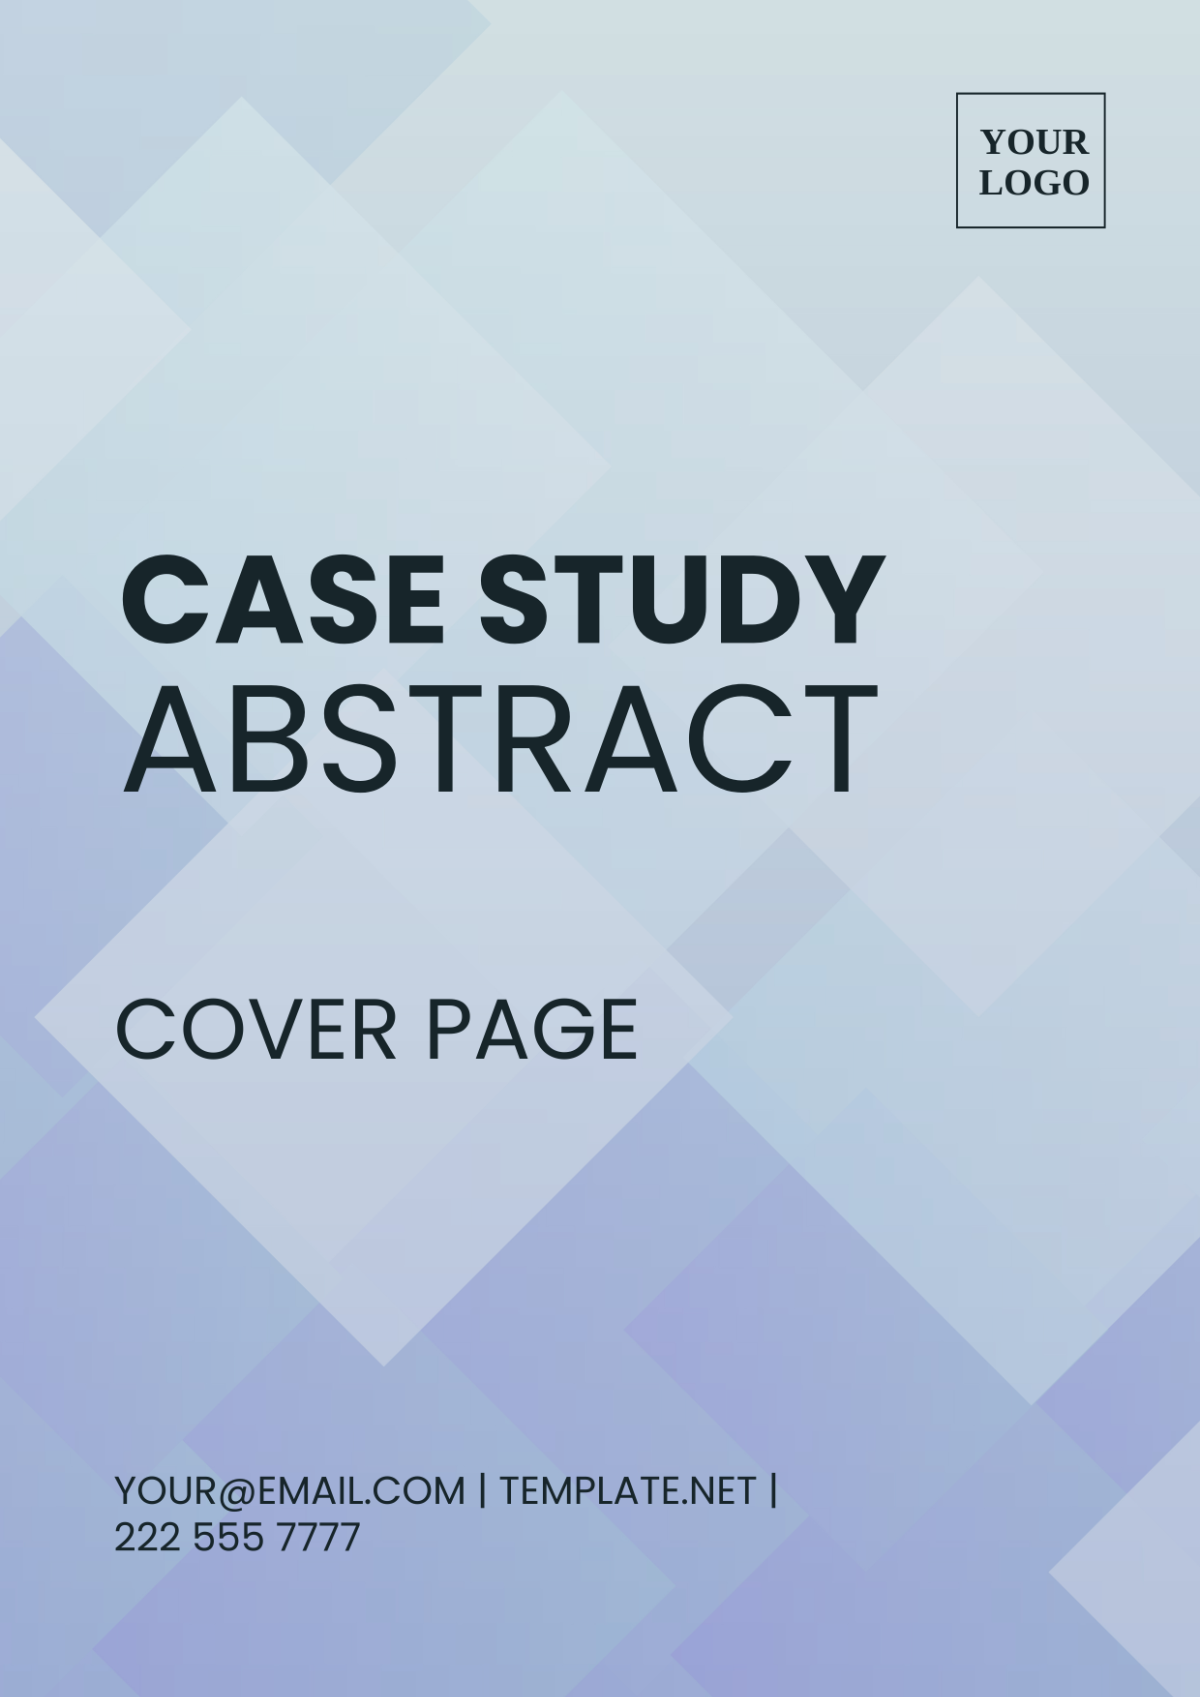 Case Study Abstract Cover Page Template